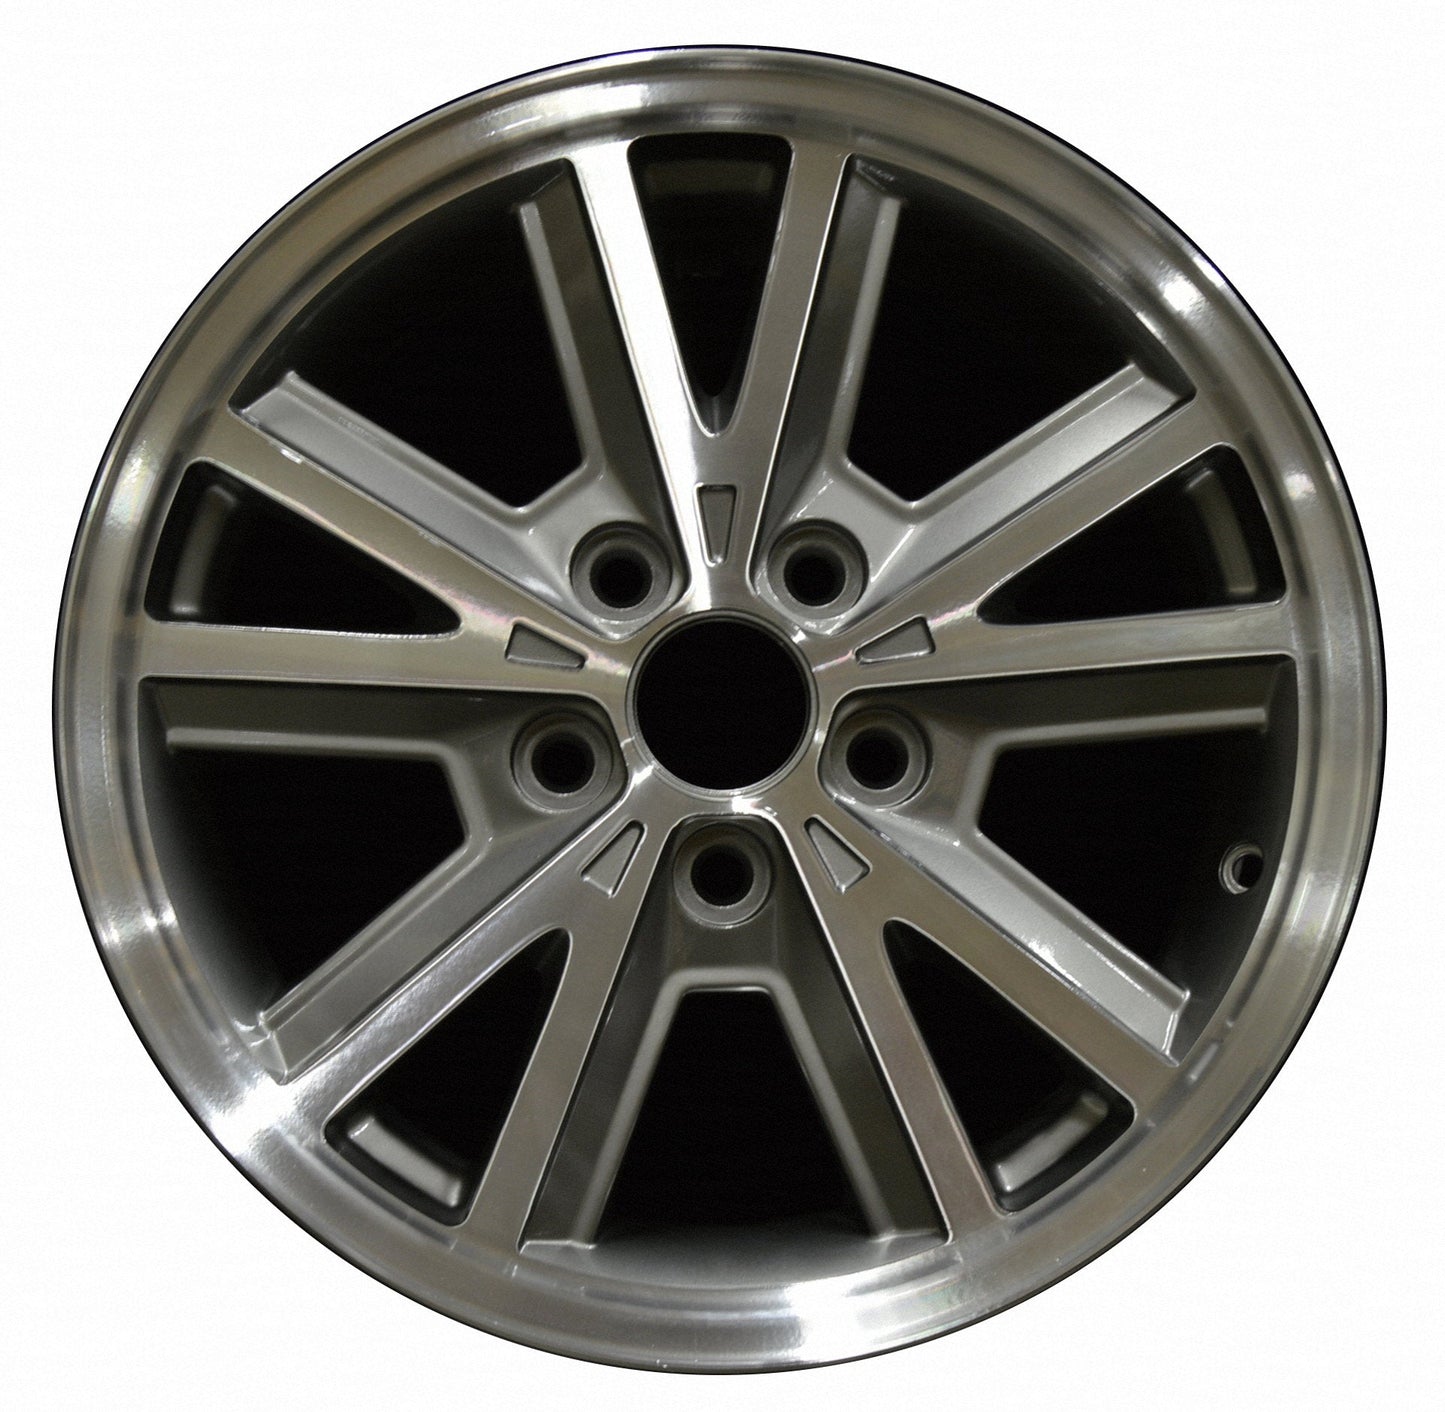 Ford Mustang  2004, 2005, 2006, 2007, 2008, 2009 Factory OEM Car Wheel Size 16x7 Alloy WAO.3588.LC01.MA